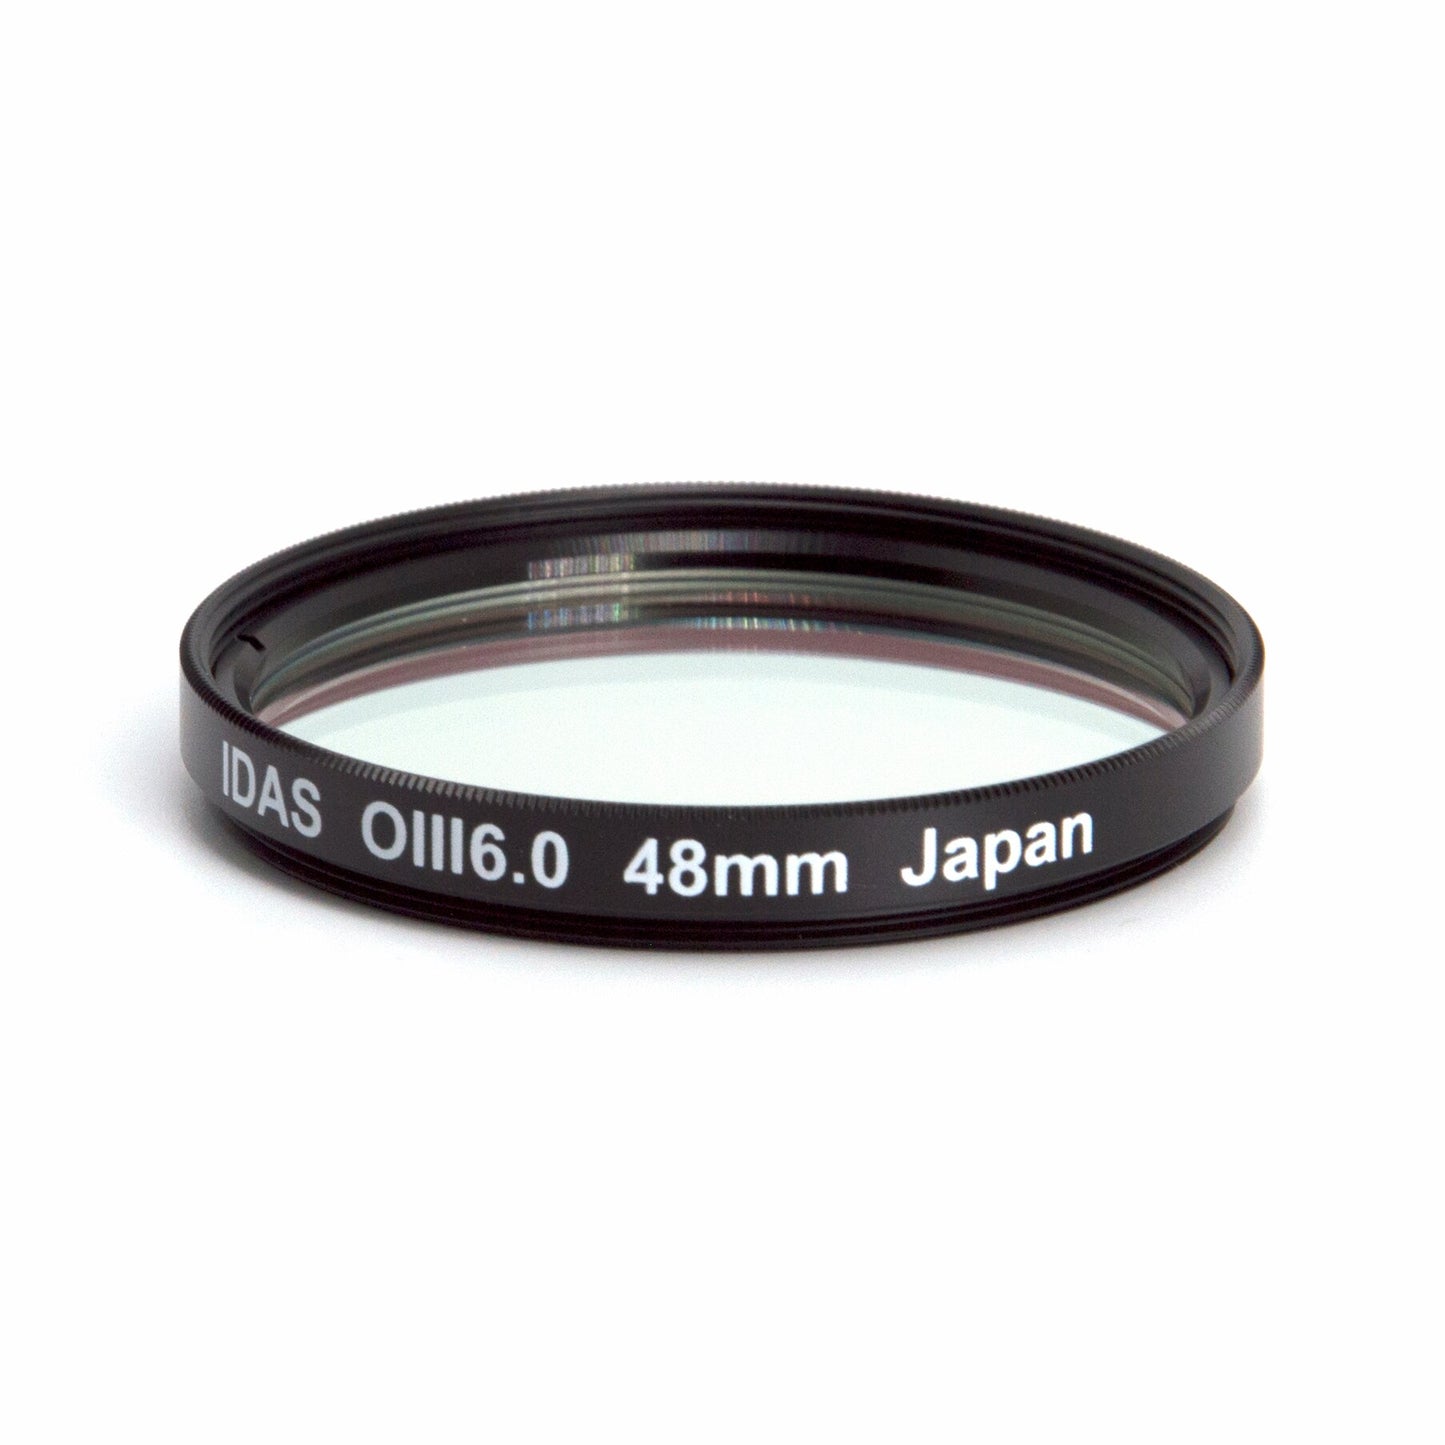 IDAS 2" M48 Mounted Narrowband OIII 6.0nm Filter Class UHS (2.5mm) Suitable from F1.65 and above telescopes